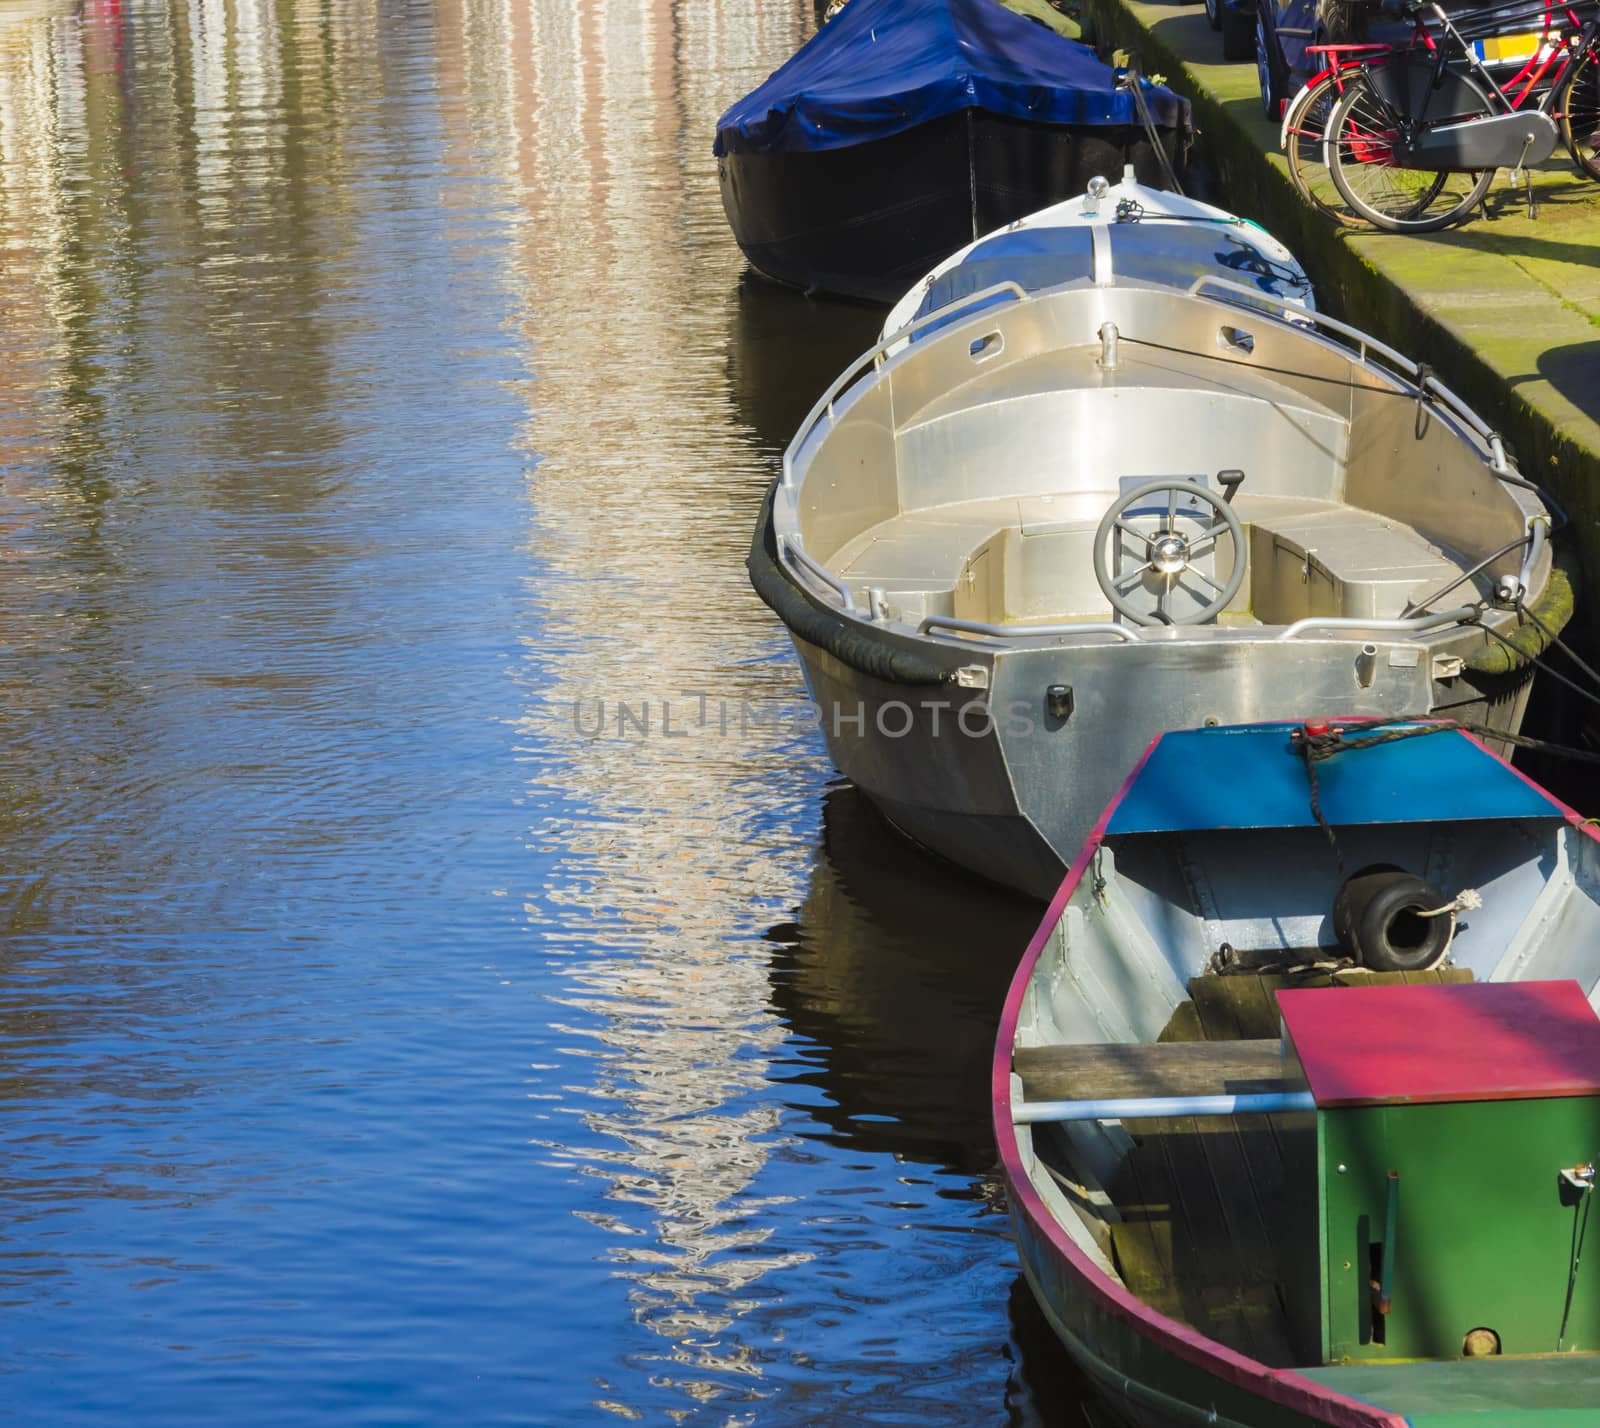 Modern boats on the canal of Amsterdam by Tetyana